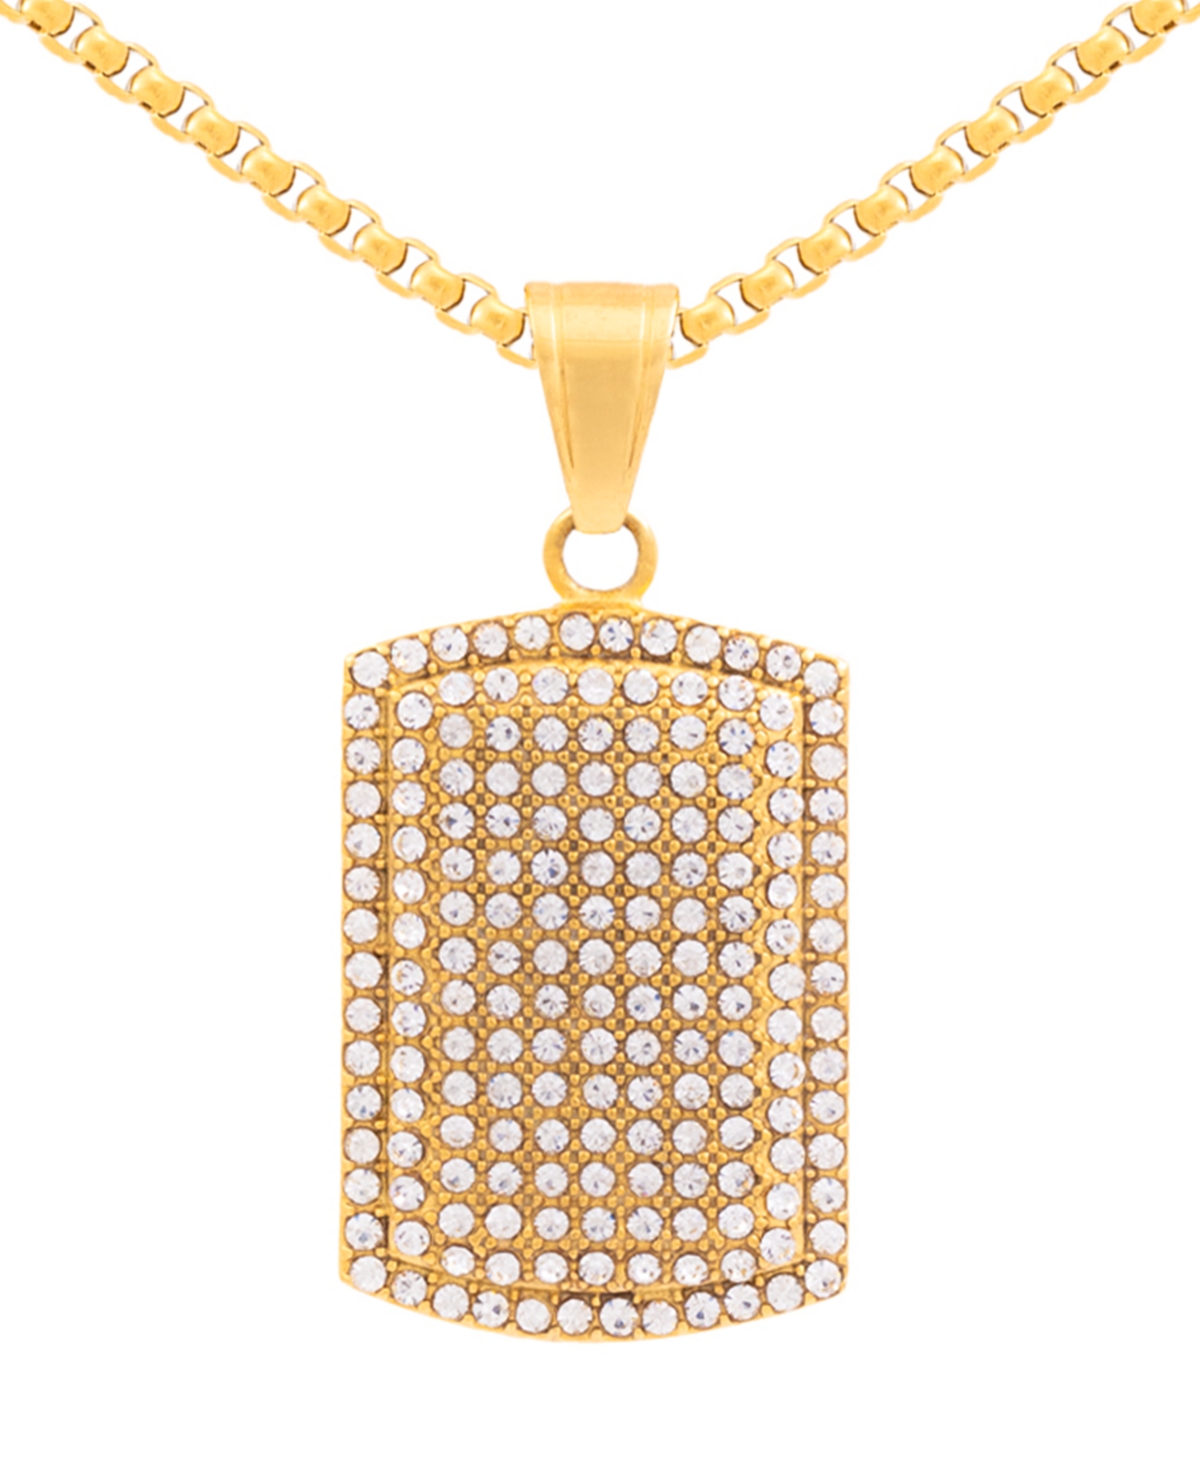 Smith Men's Cubic Zirconia Dog Tag 24" Pendant Necklace in Gold-Tone Ion-Plated Stainless Steel - Gold-Tone